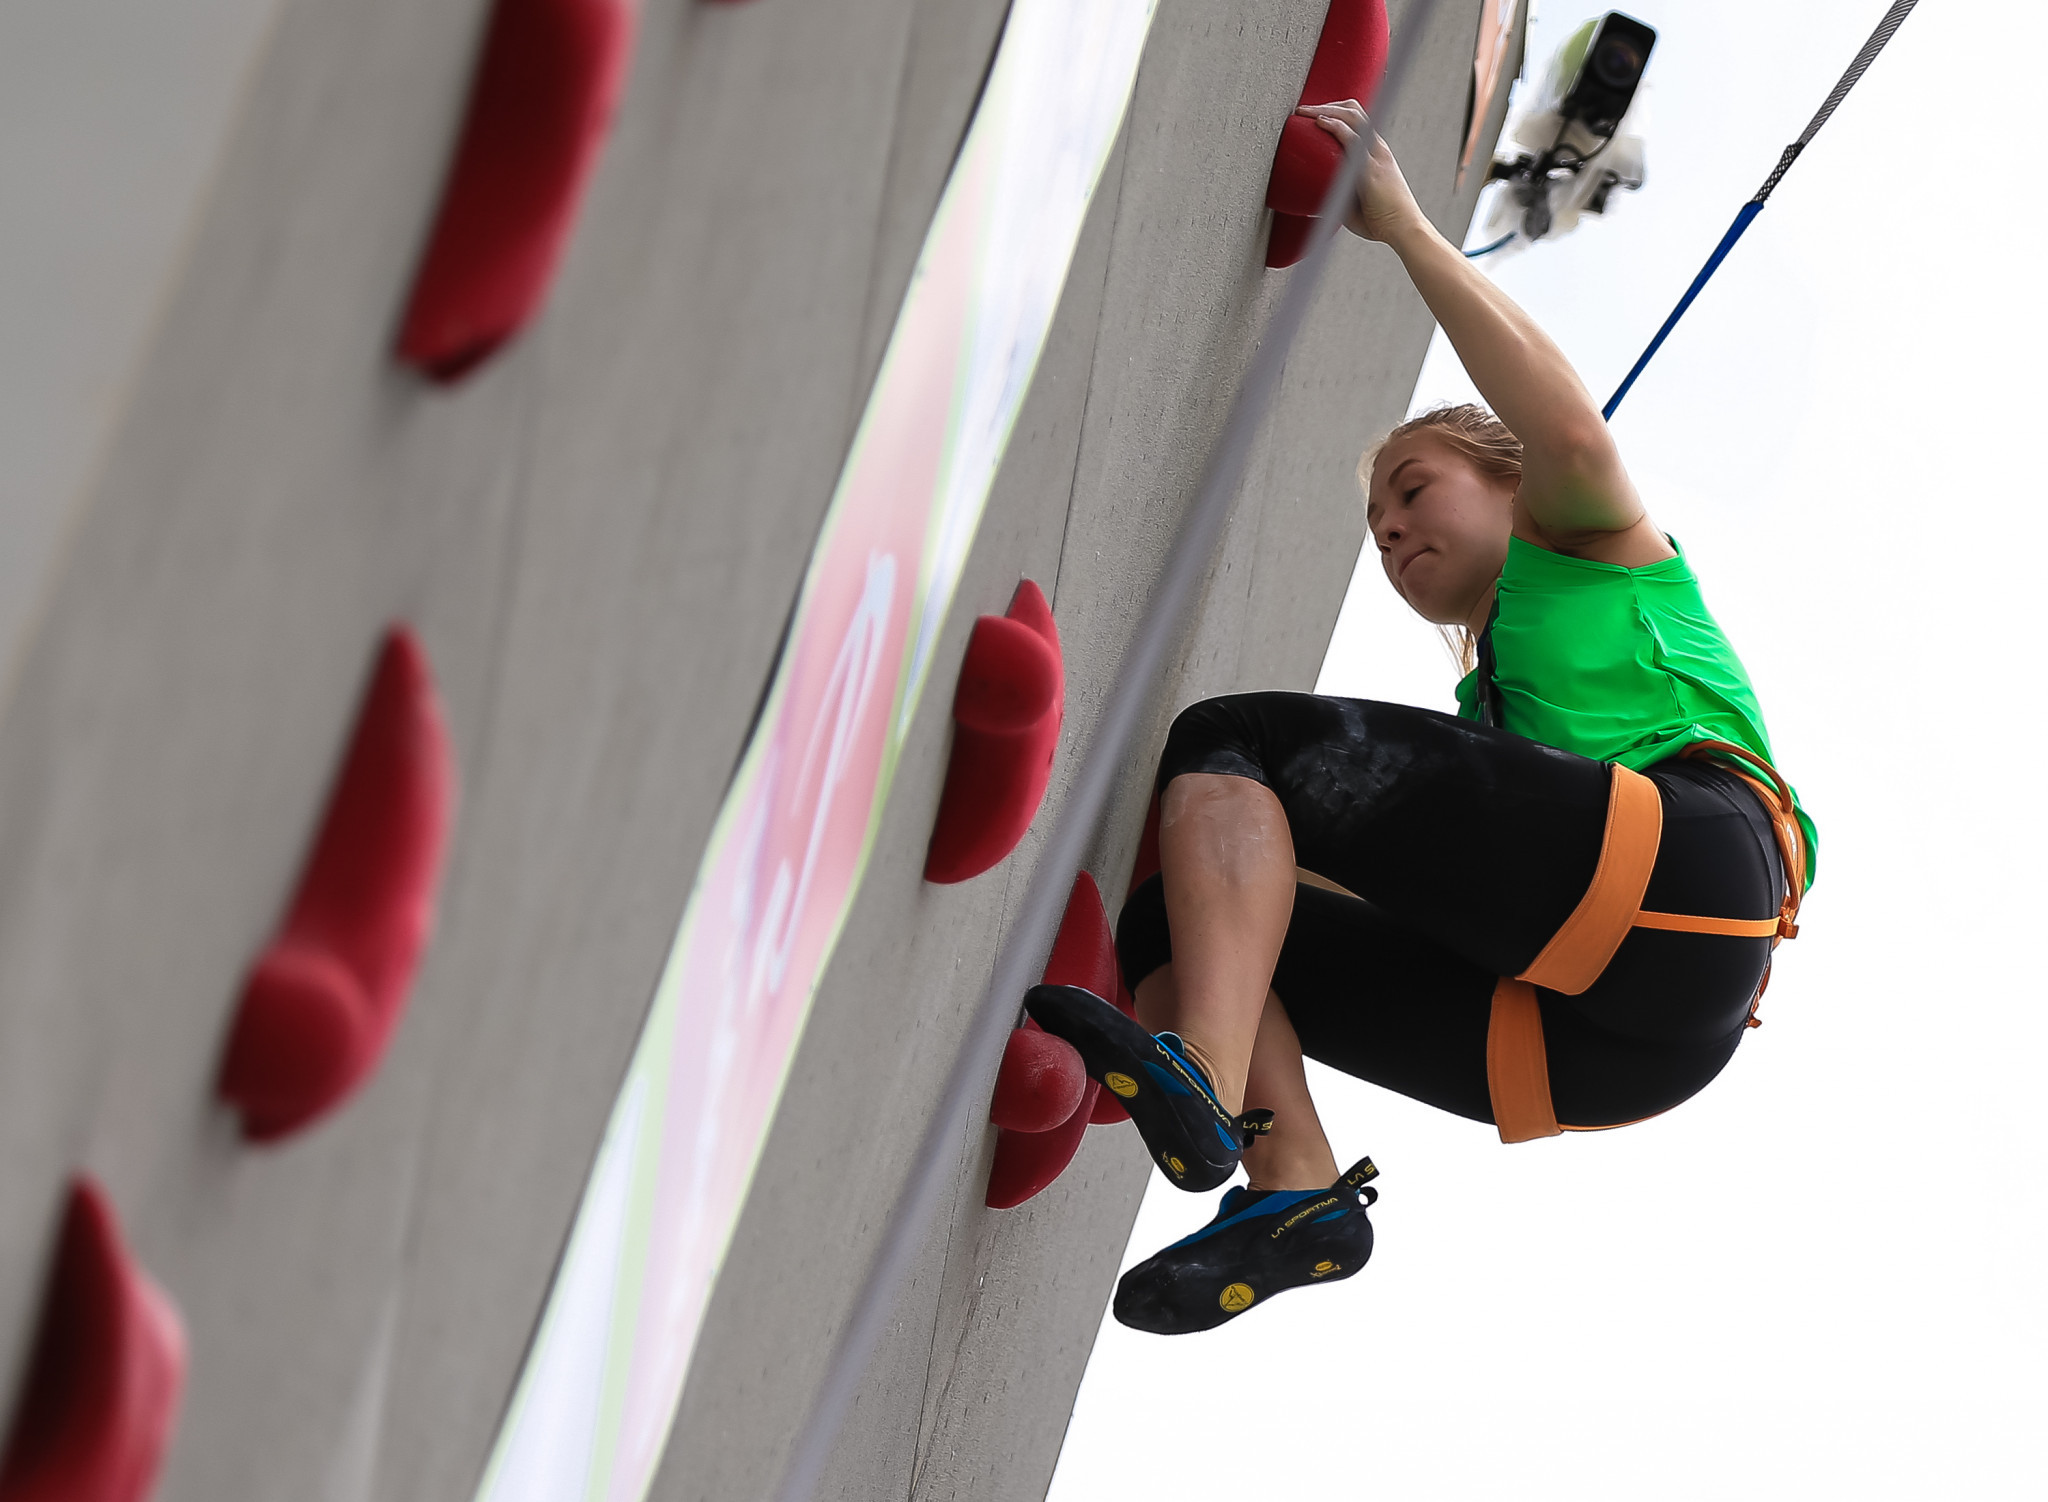 IFSC confirms Salt Lake City to host World Cup competitions in May